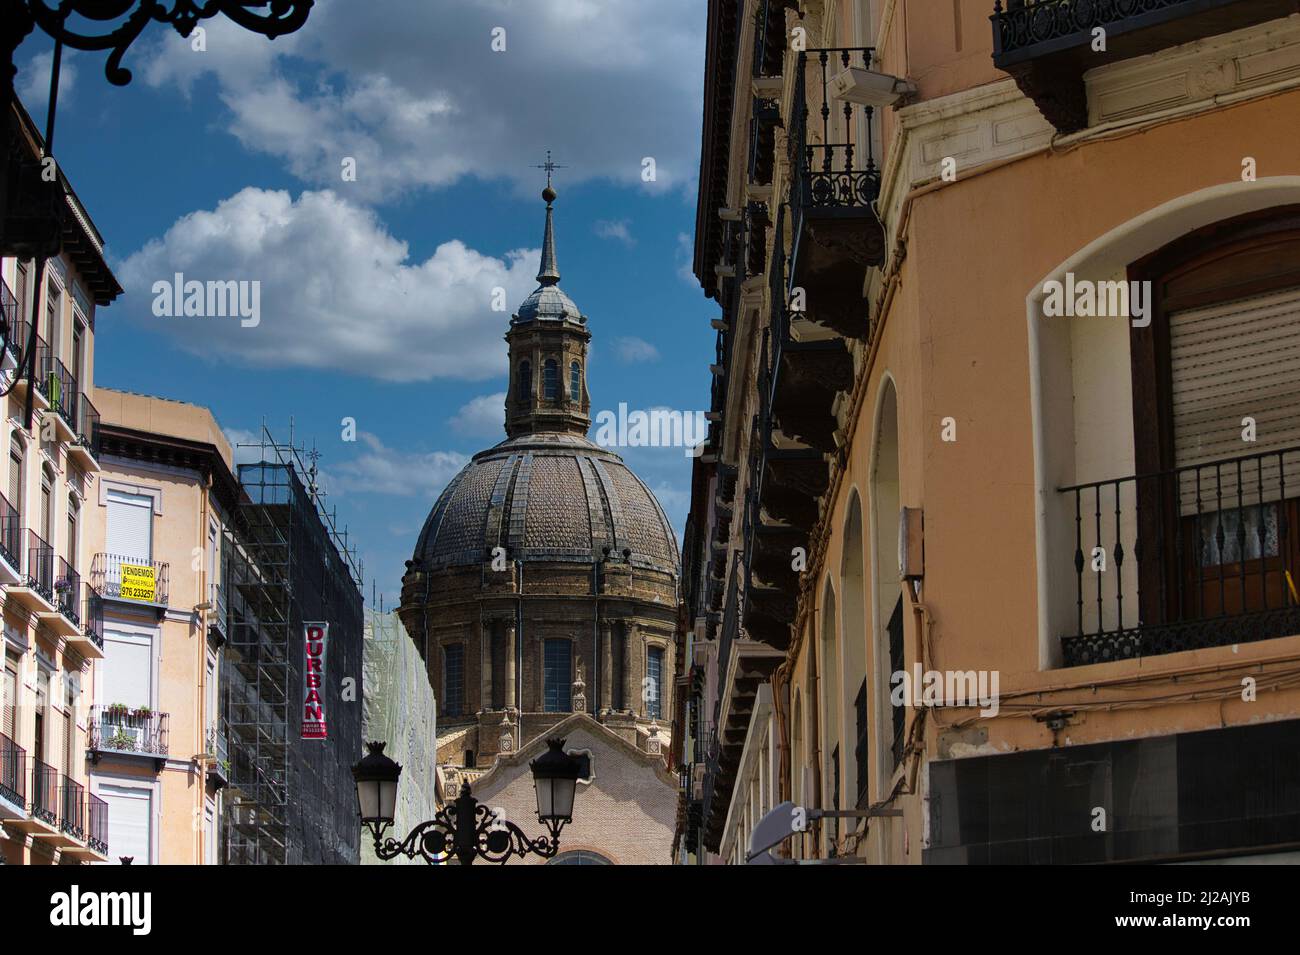 Some architectural details of historic buildings in the beautiful city of Zaragoza in Spain Stock Photo